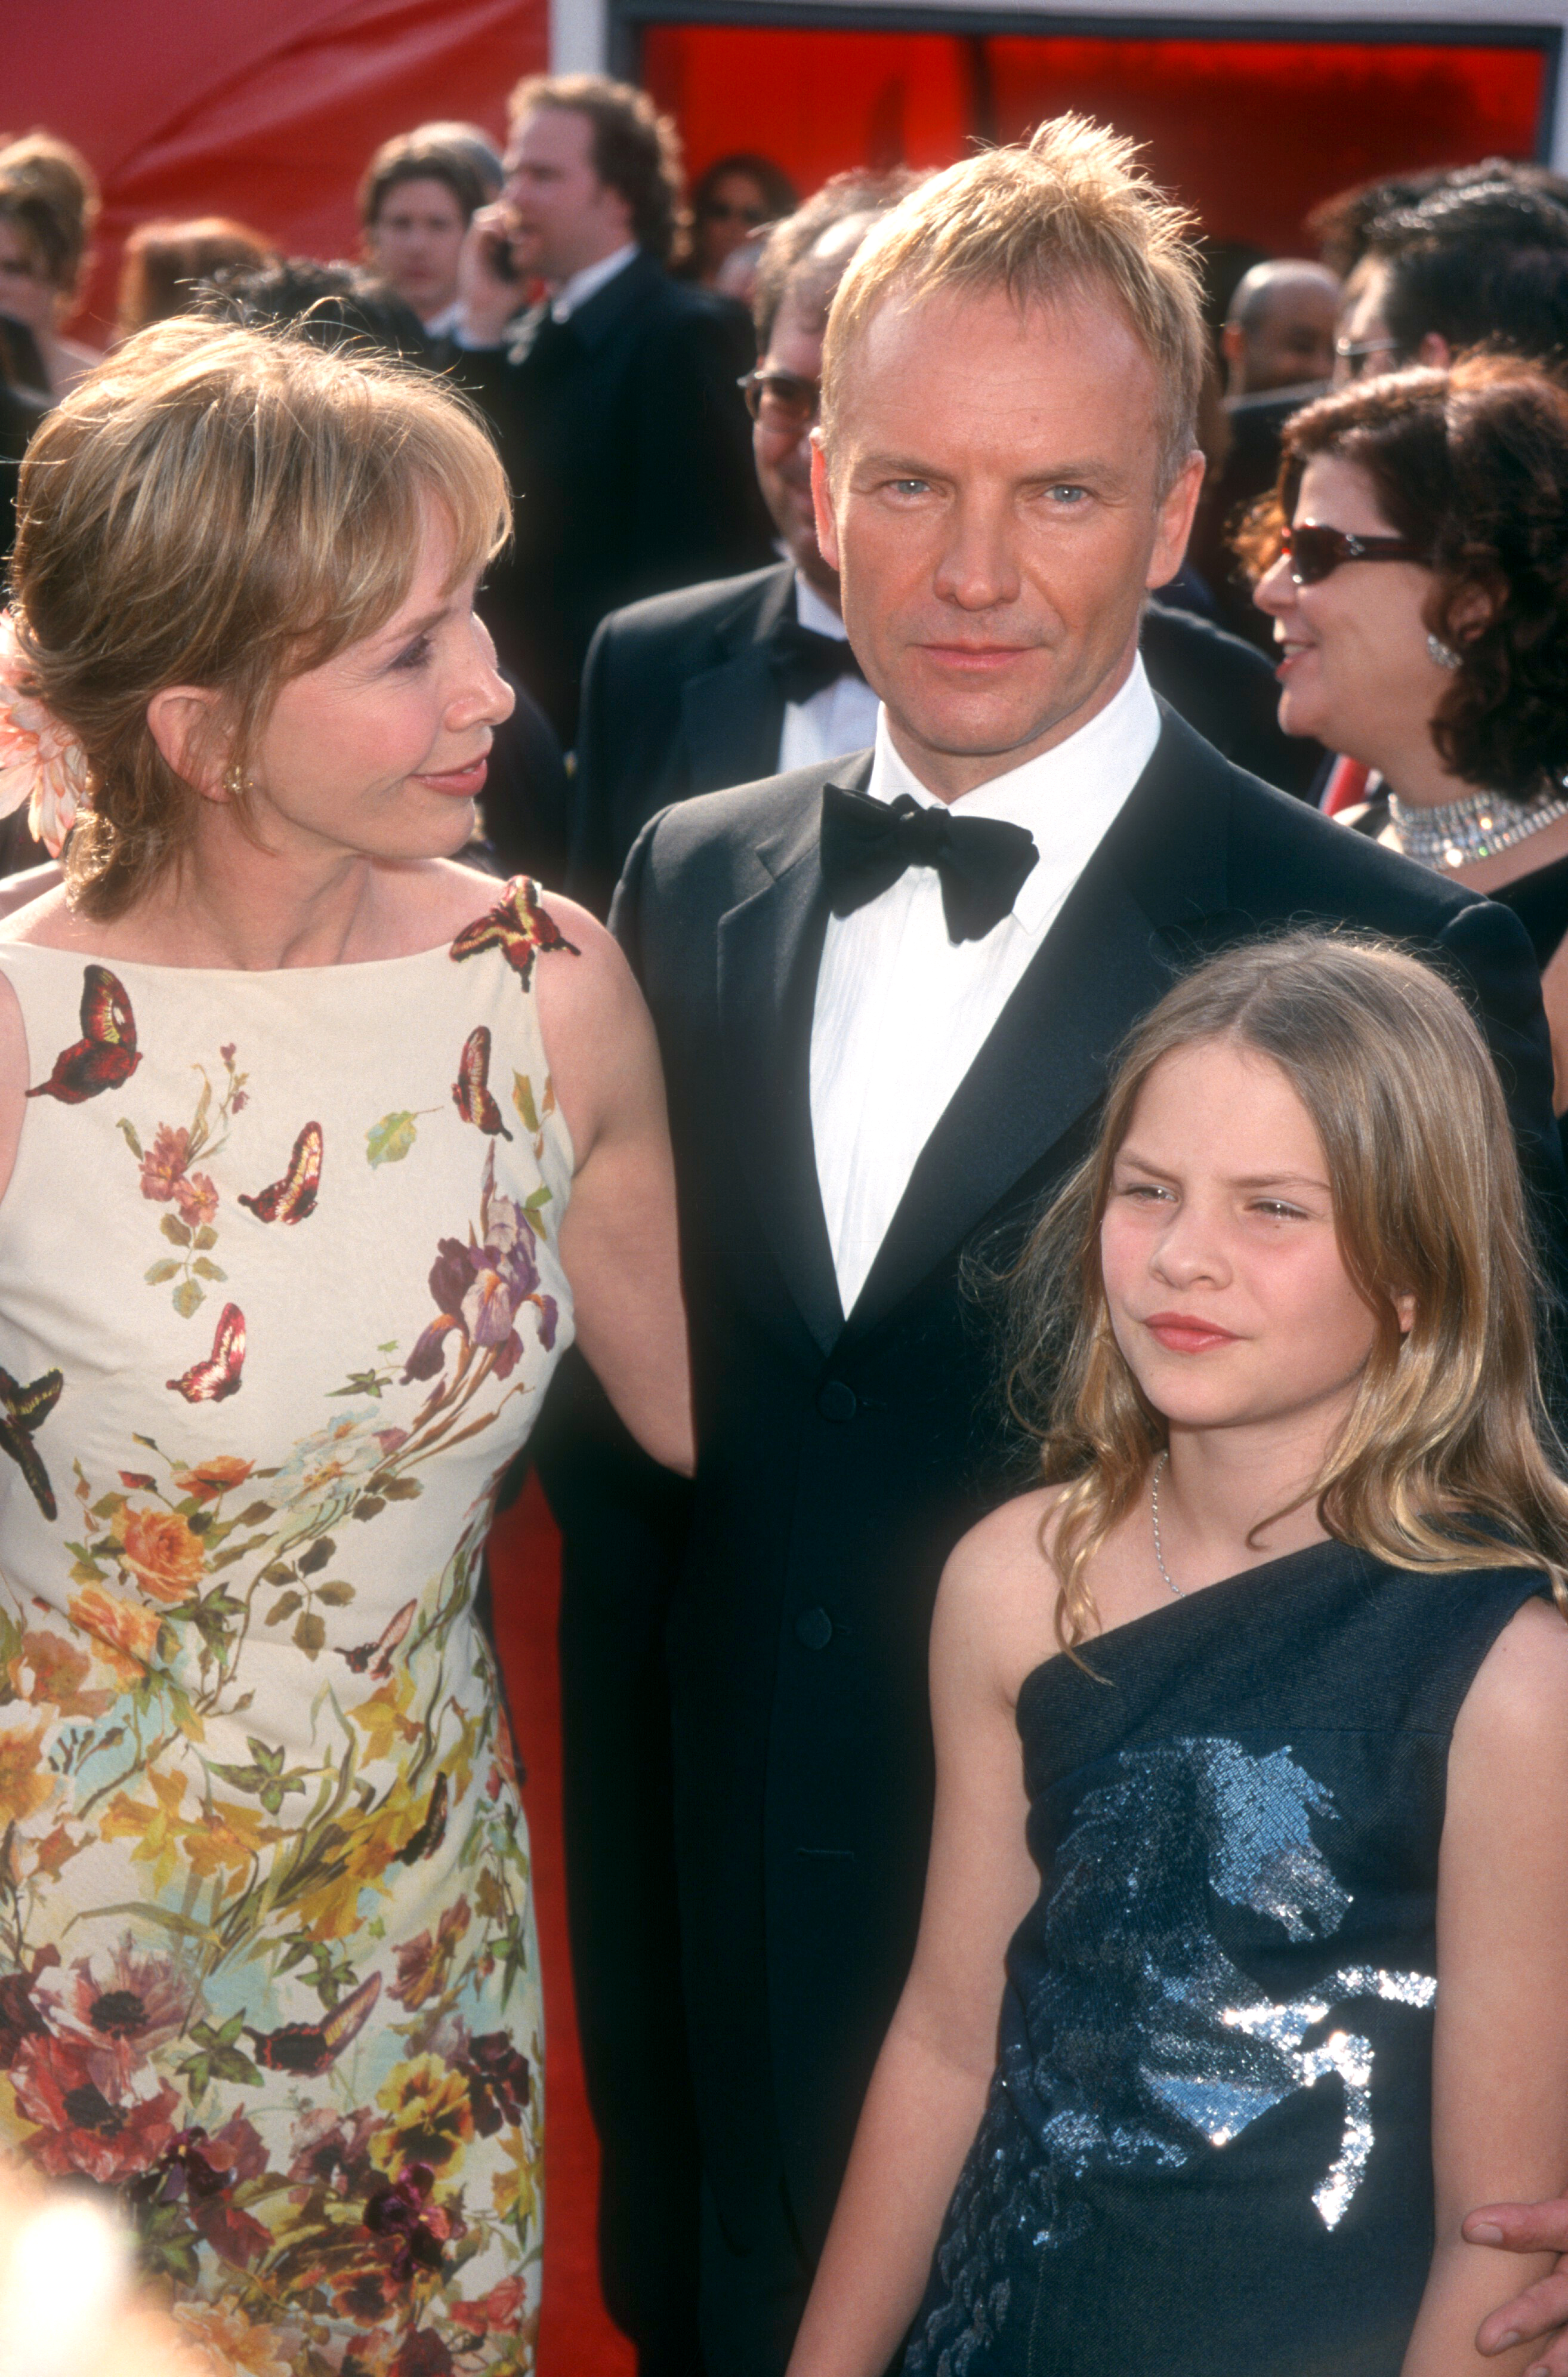 Trudie Styler and Sting with their daughter Eliot Sumner attend the 73rd Annual Academy Awards on March 25, 2001 in Los Angeles, California | Source: Getty Images